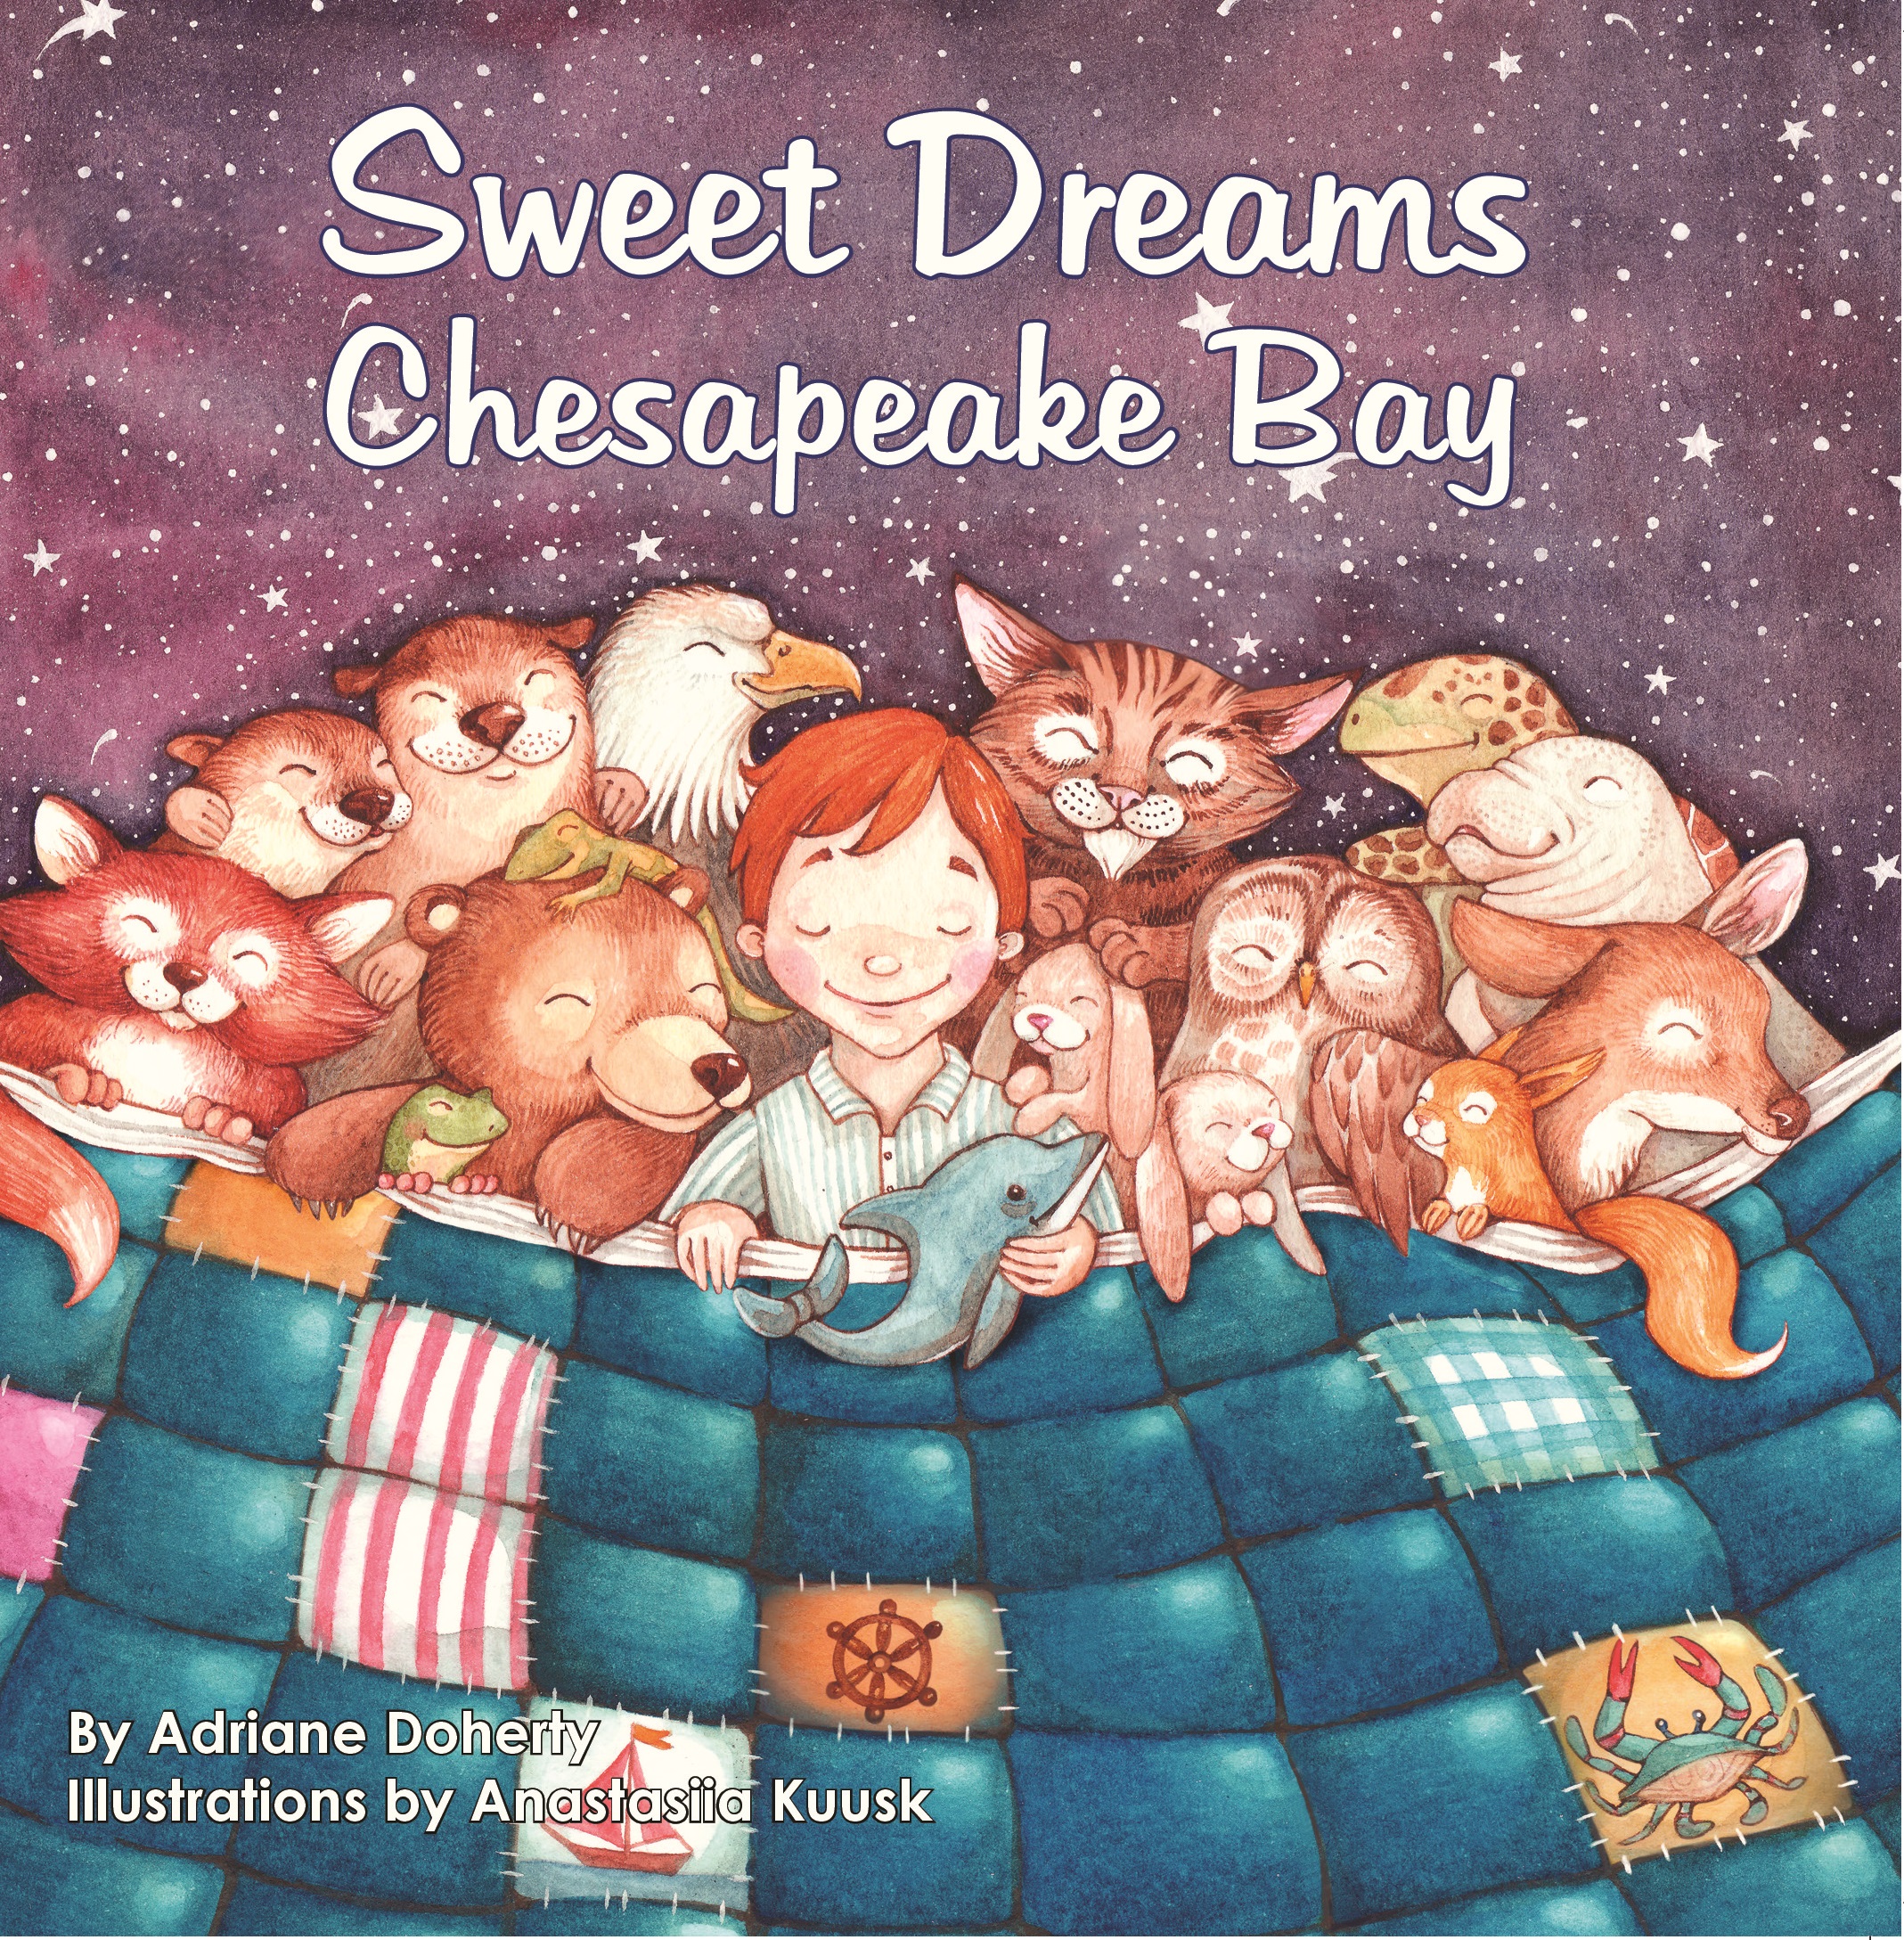 Sweet Dreams - Book Summary & Video, Official Publisher Page